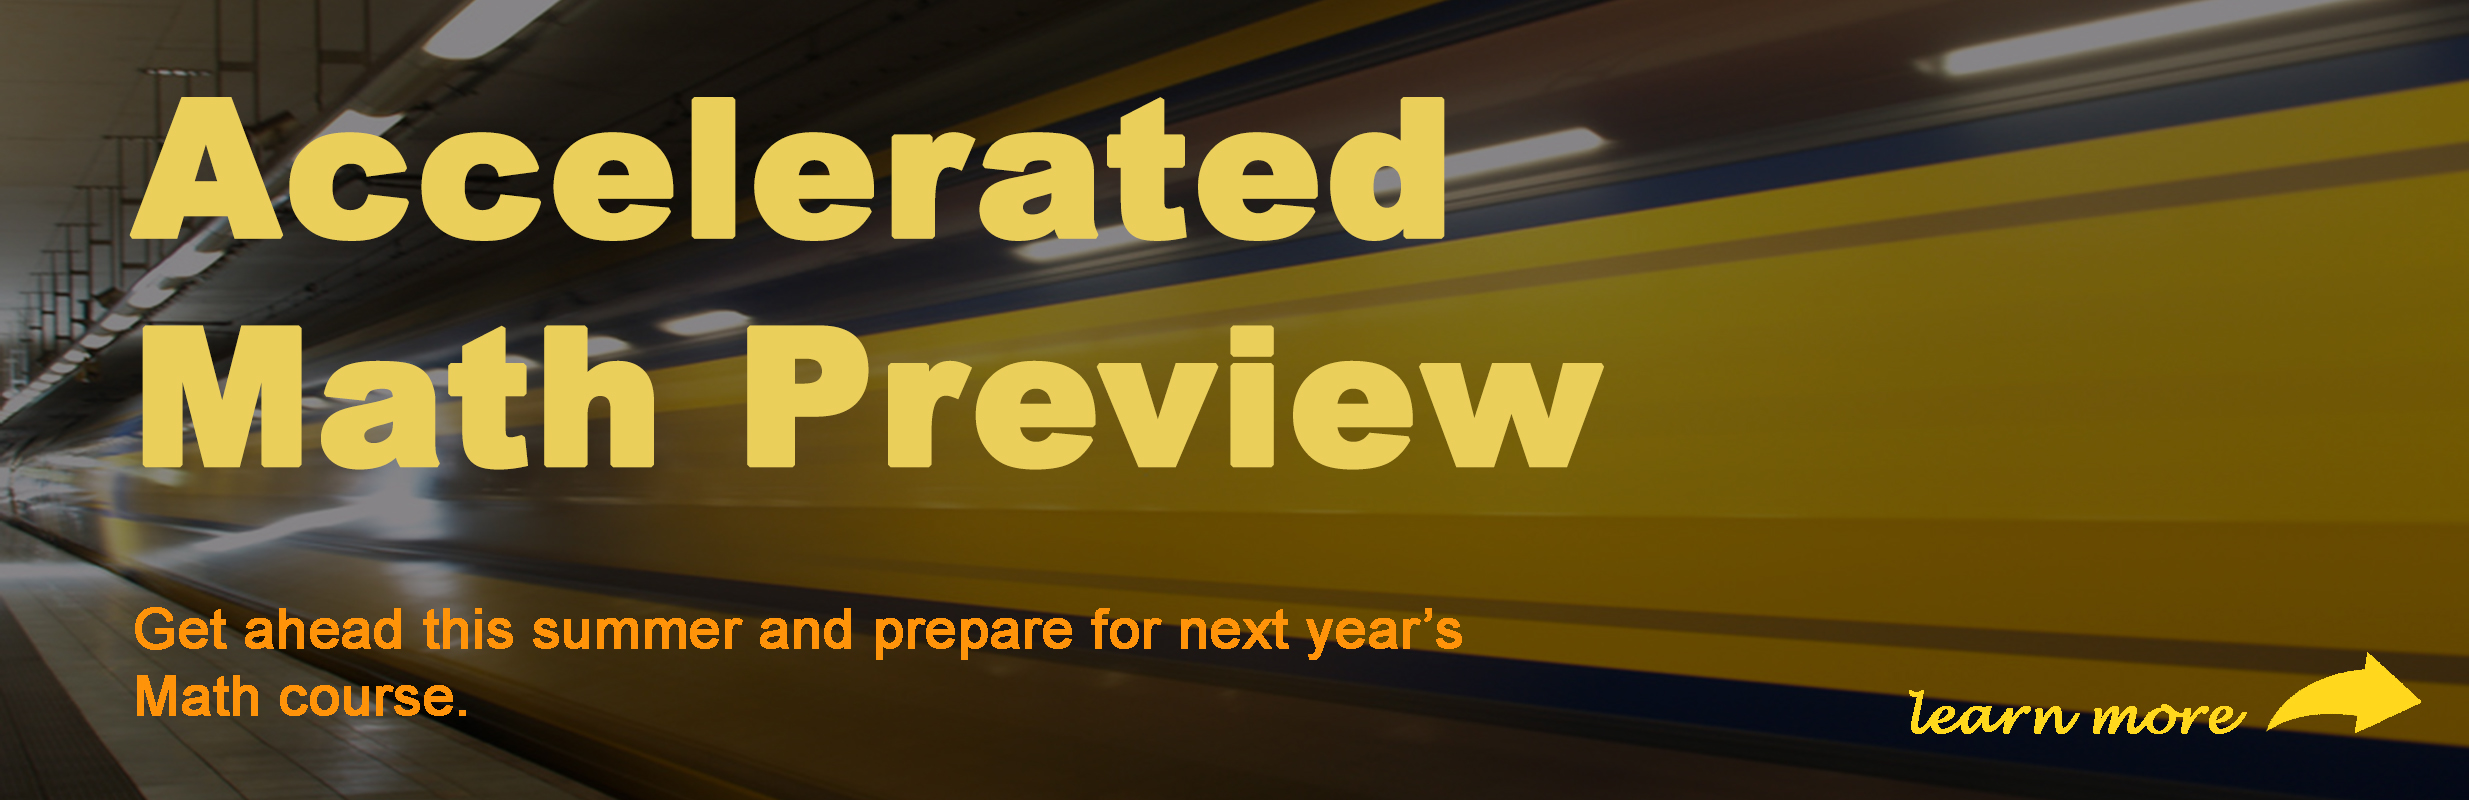 Accelerated Math Preview